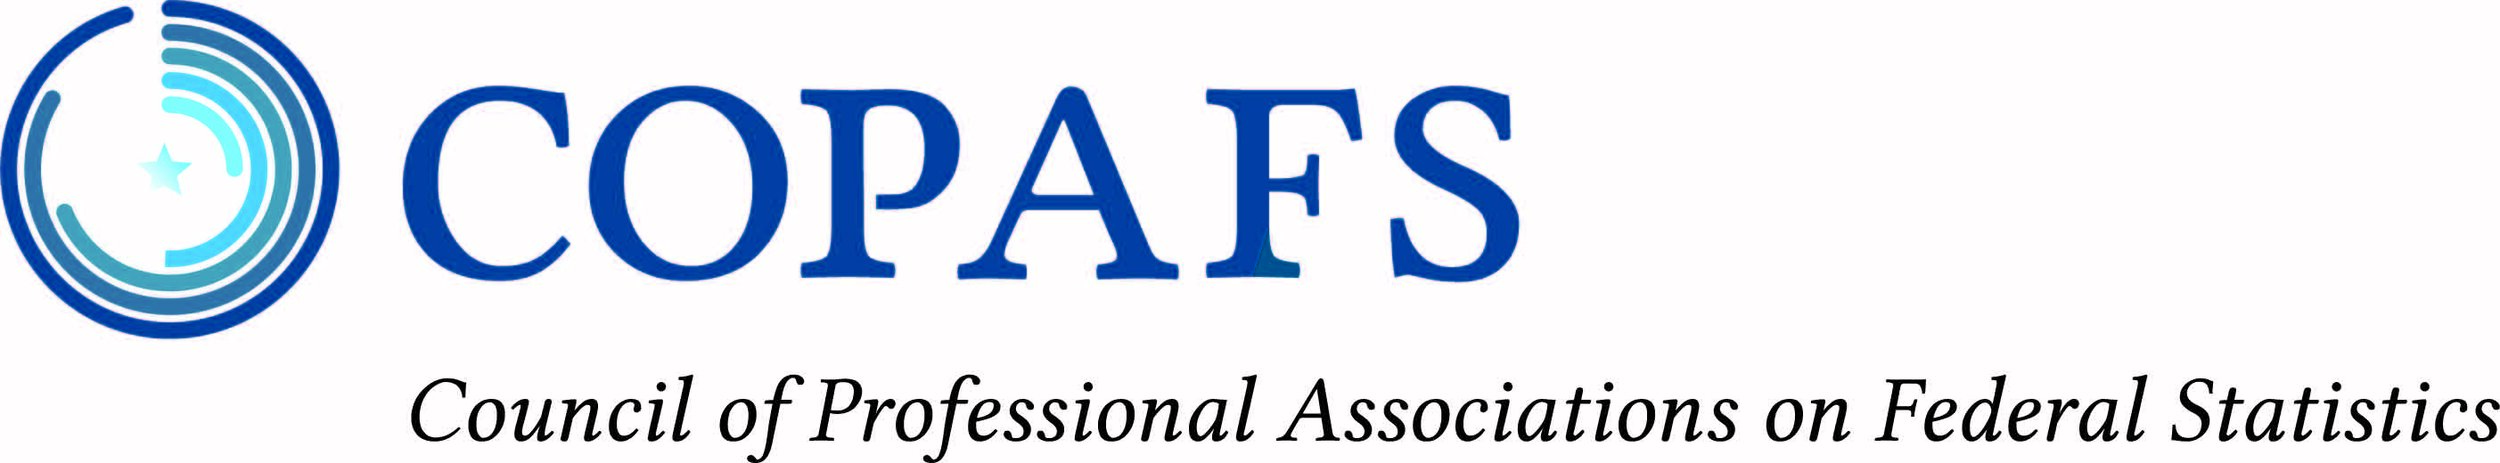 Council of Professional Associations on Federal Statistics